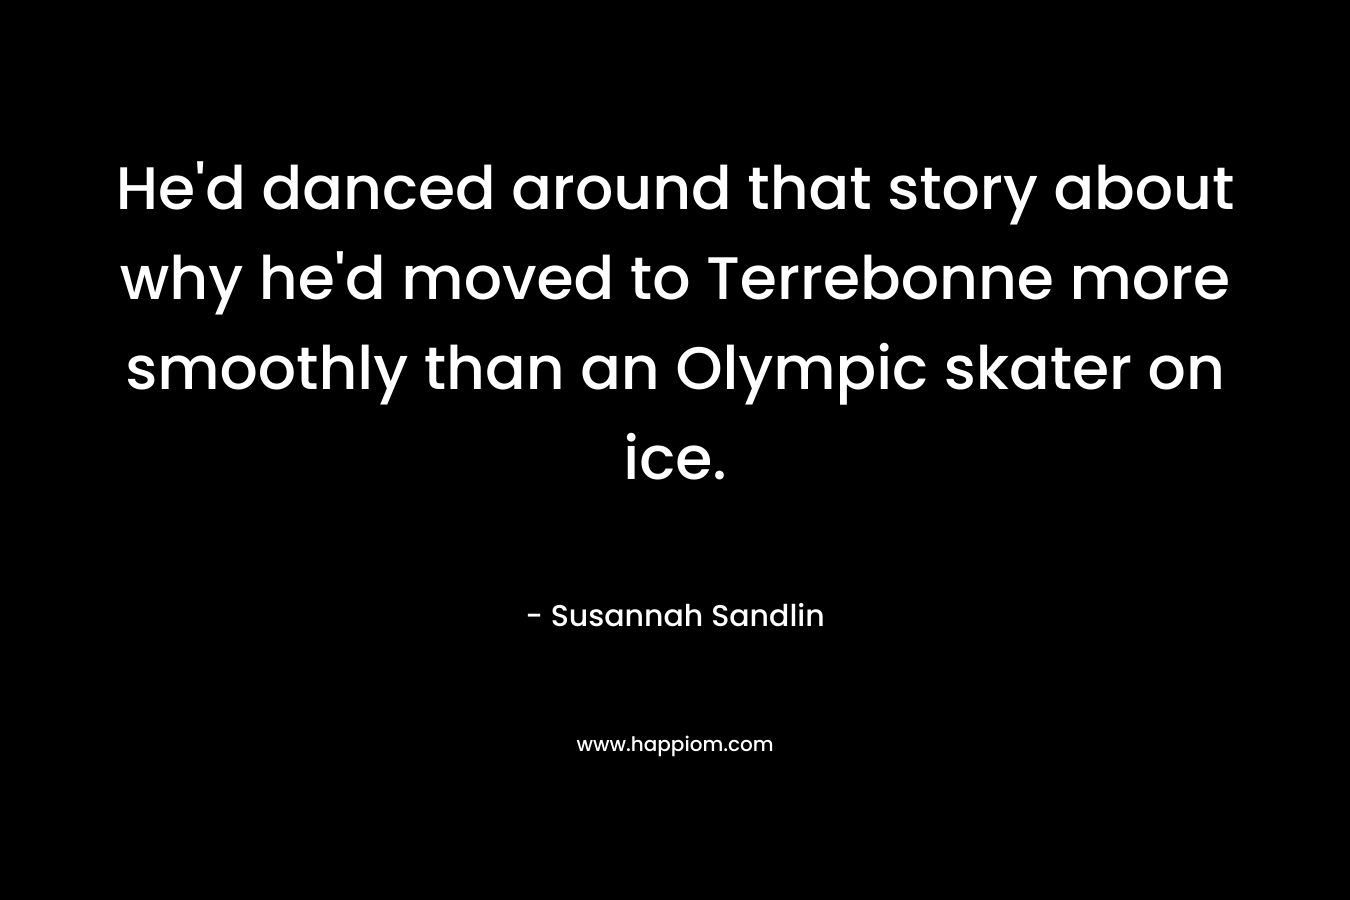 He’d danced around that story about why he’d moved to Terrebonne more smoothly than an Olympic skater on ice. – Susannah Sandlin